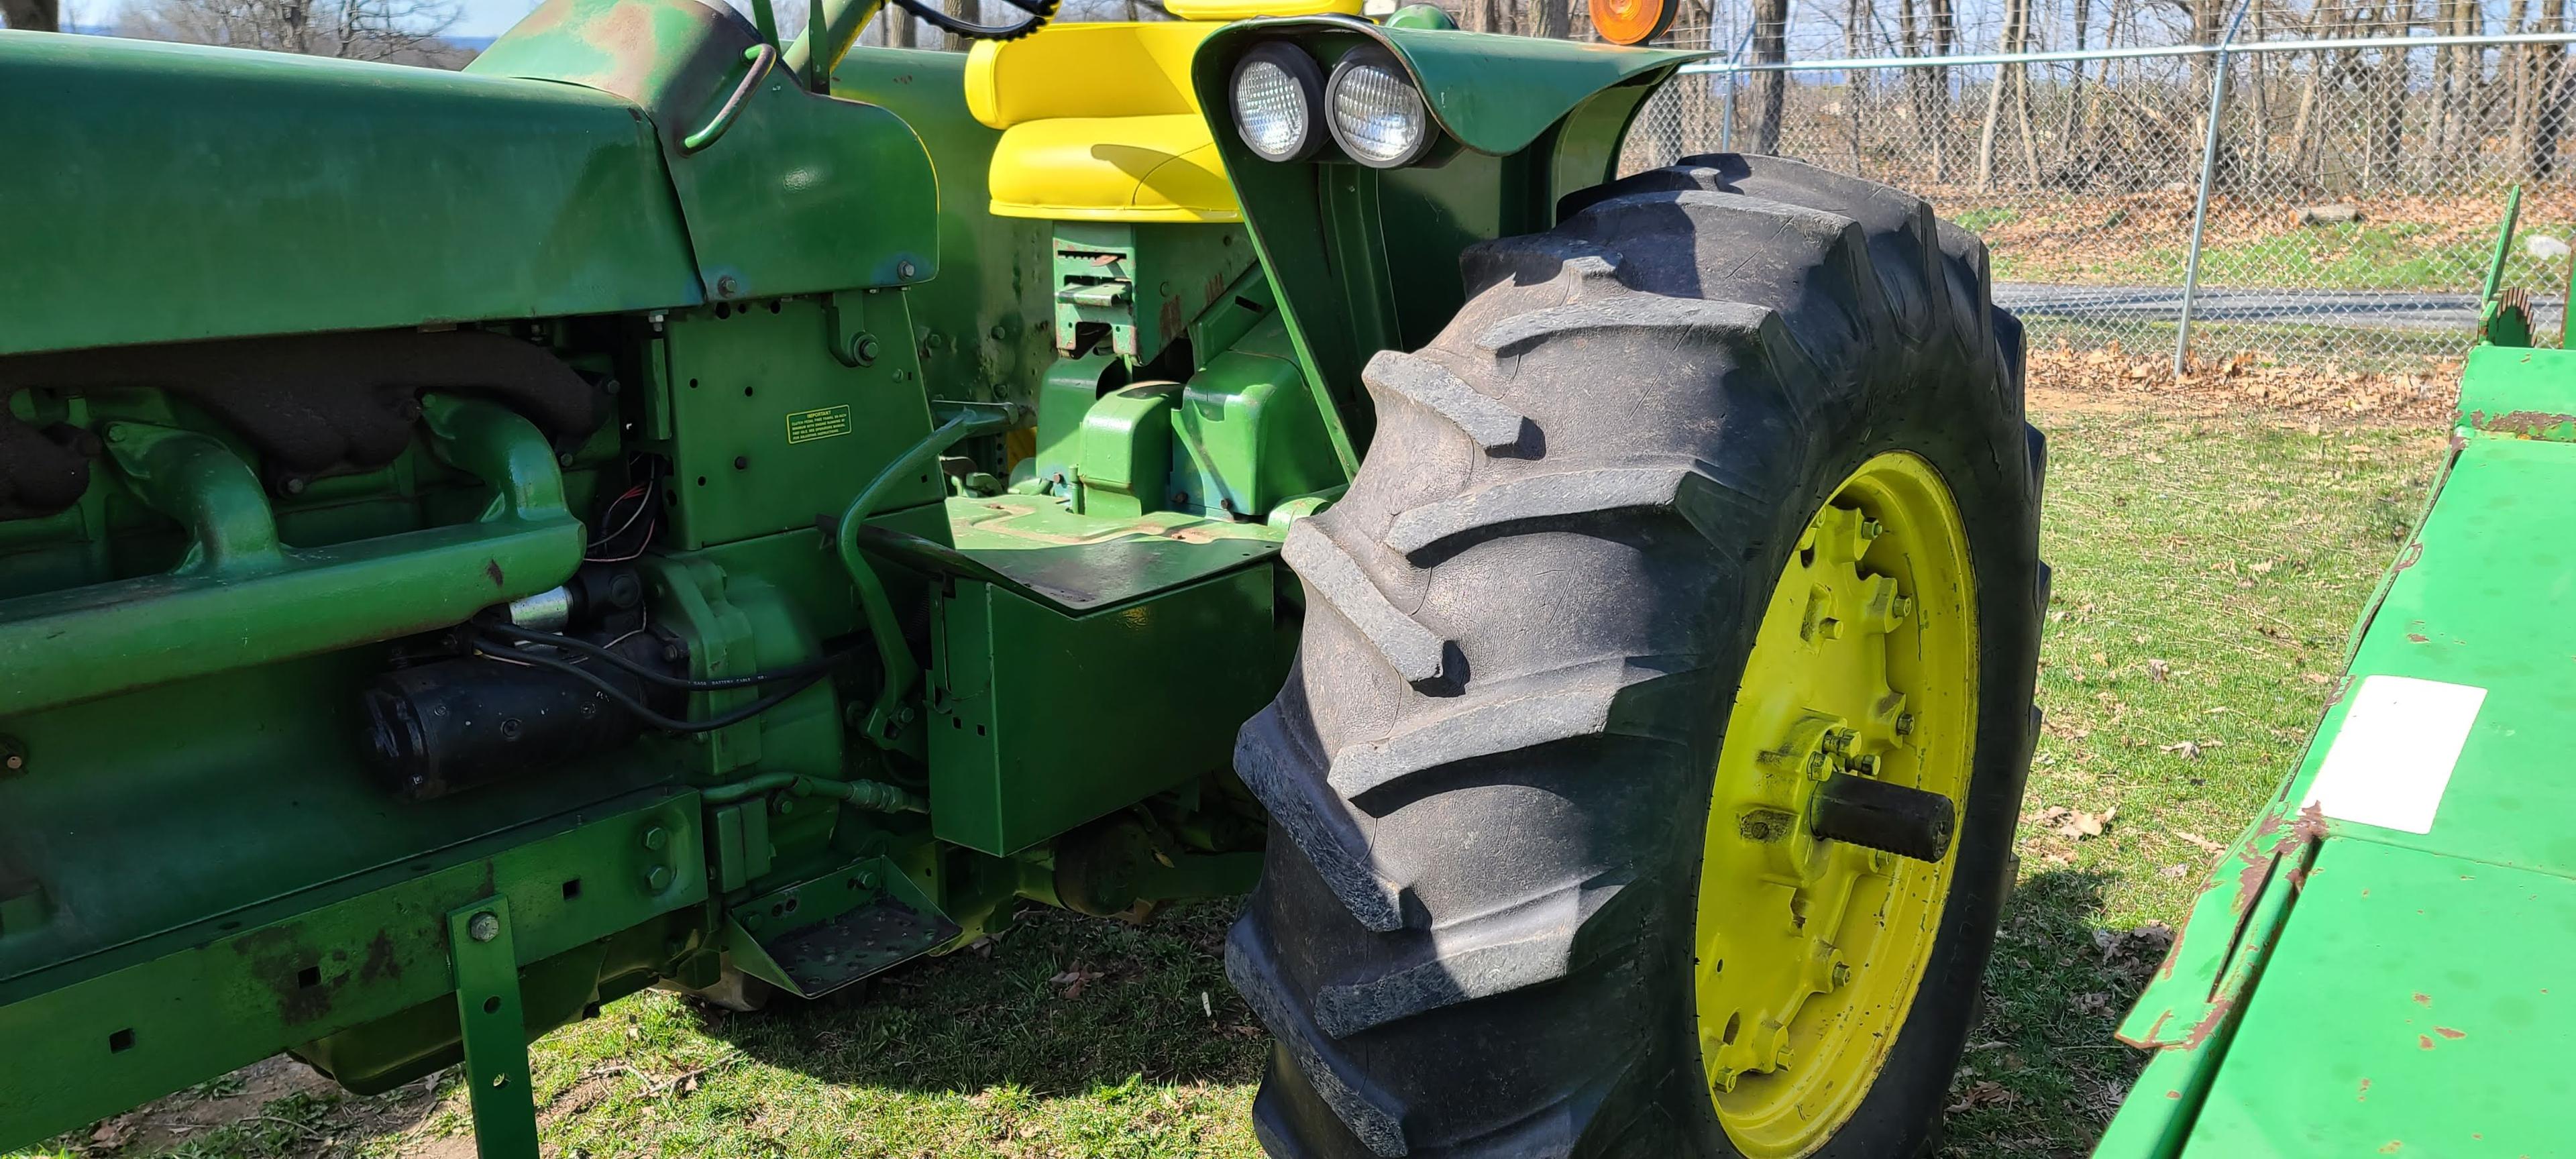 John Deere 4020 Tractor (RIDE AND DRIVE)